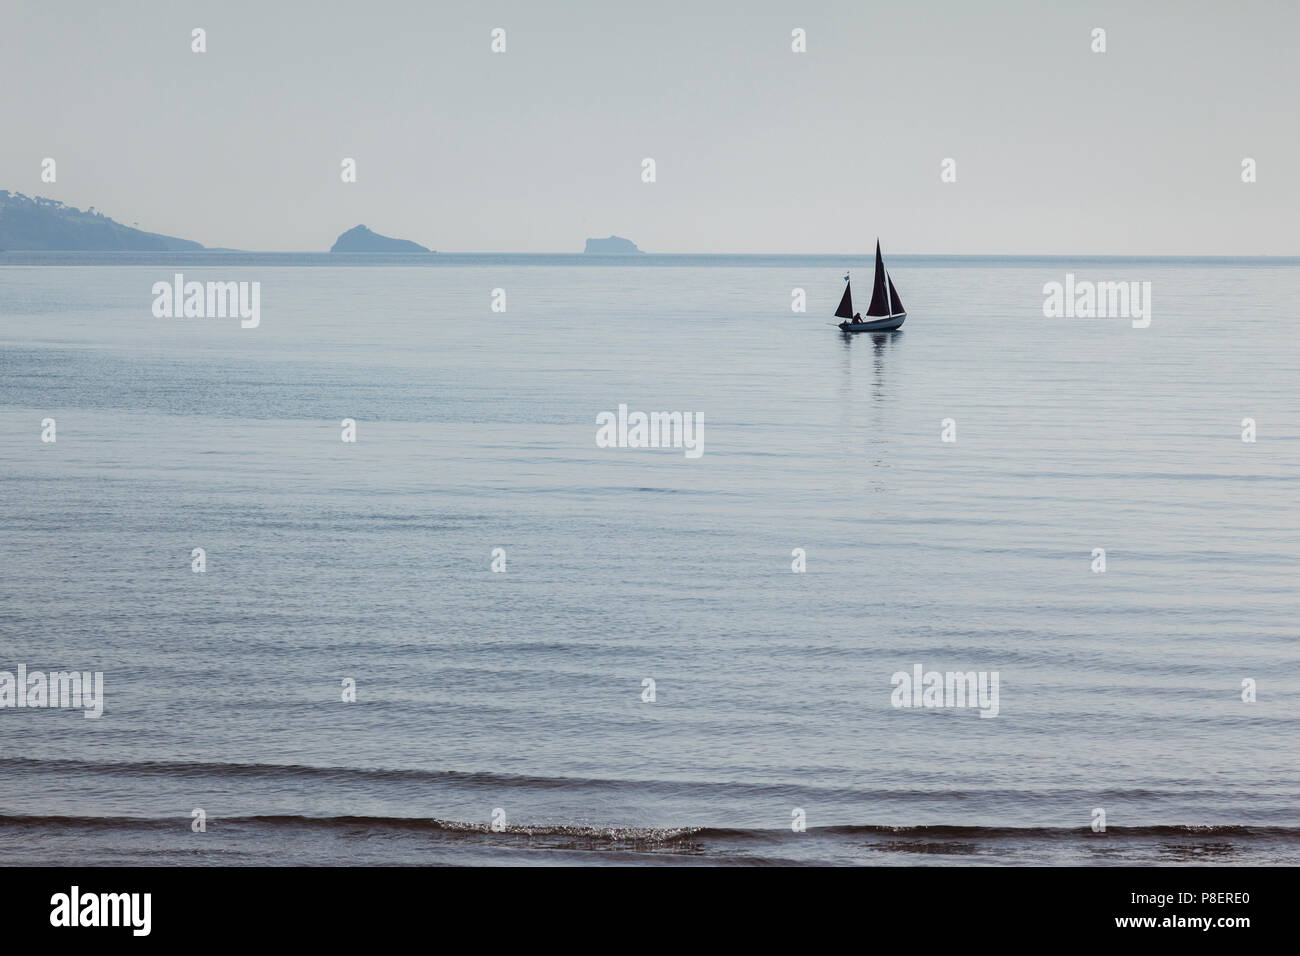 20 May 2018: Paignton, Devon, UK - A sailing boat in Torbay on a soft light day. Stock Photo